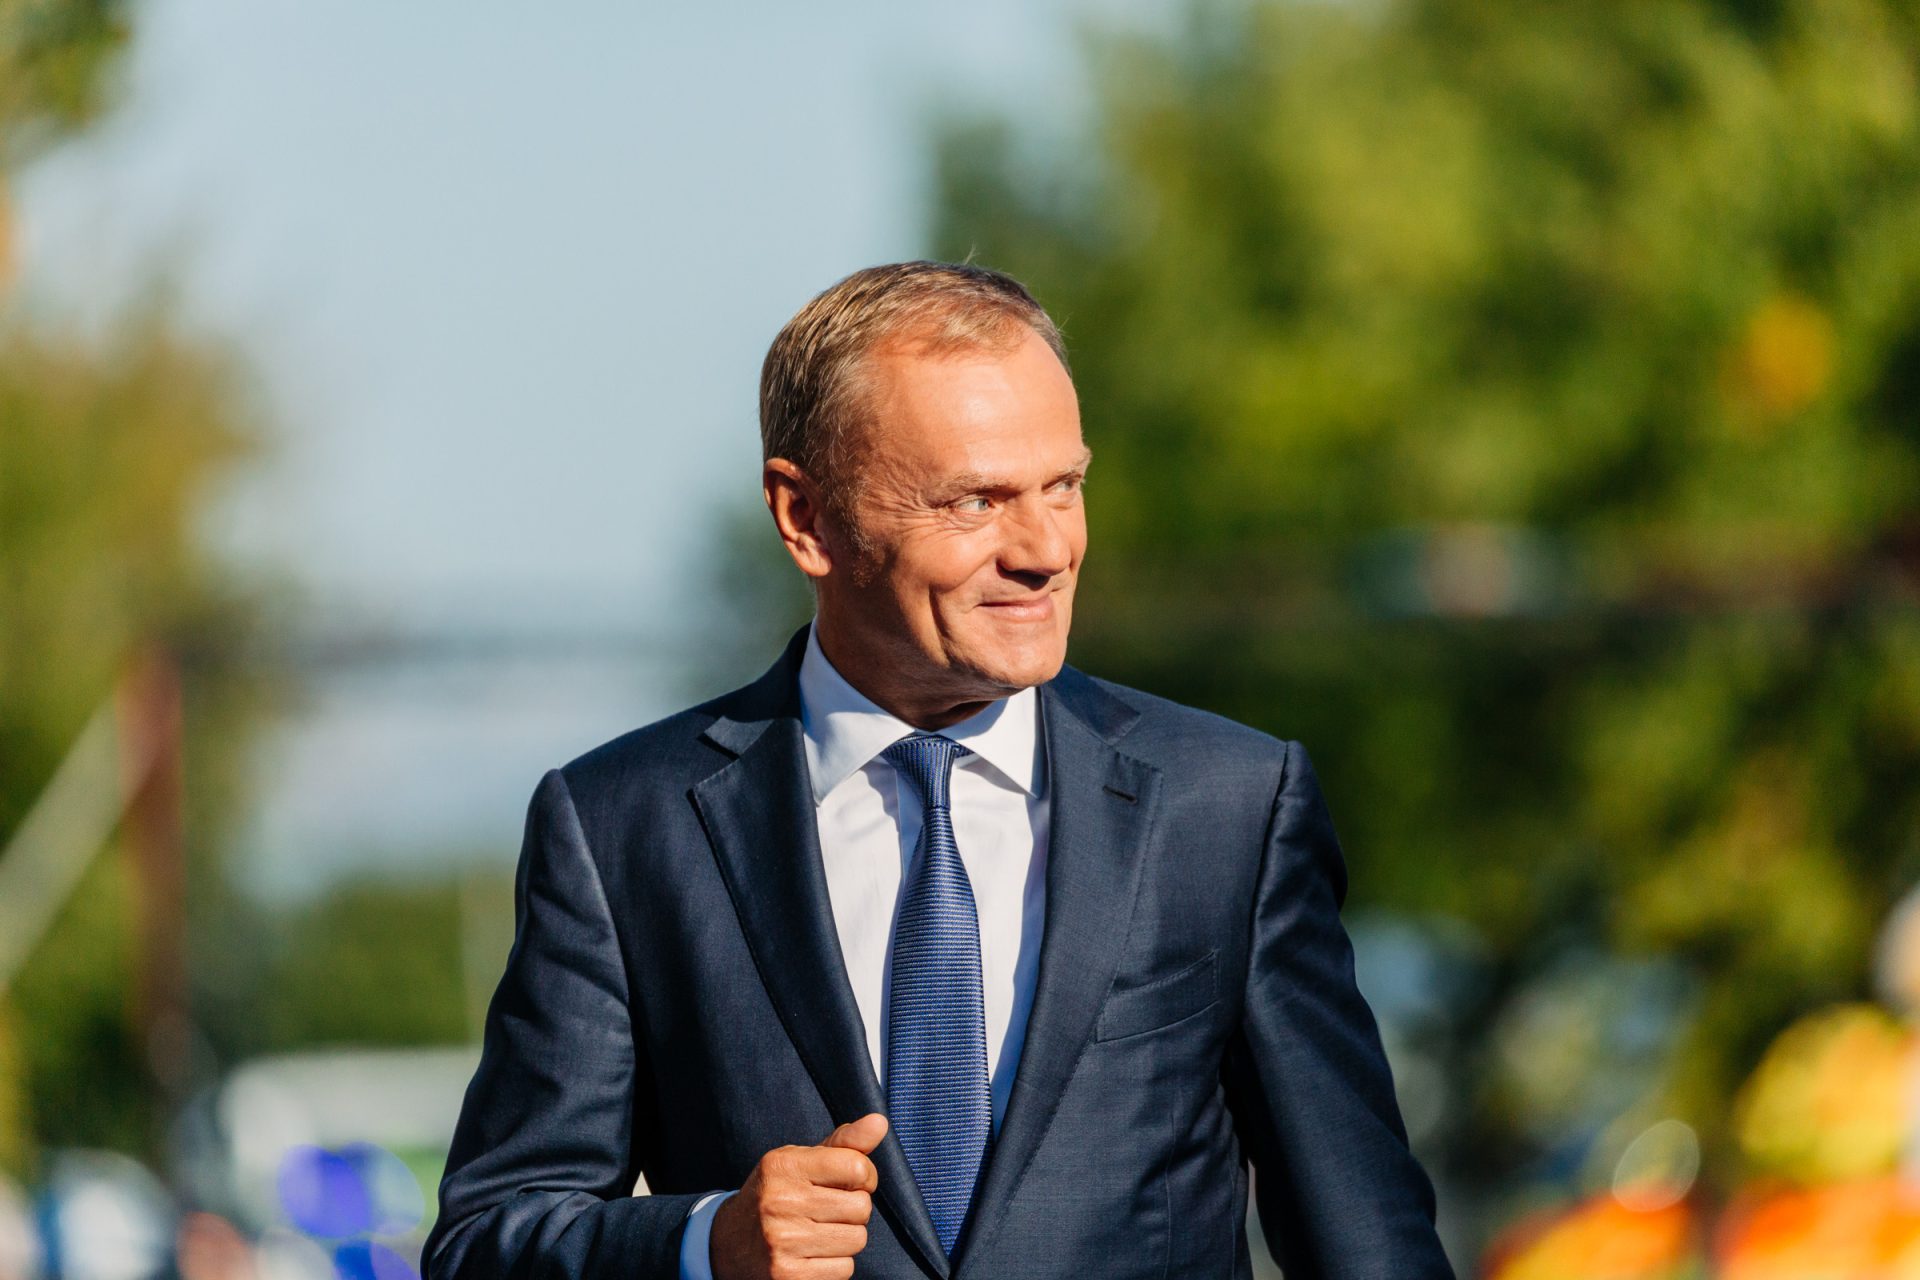 Poland is prioritizing climate change by electing Donald Tusk, a leader who puts it at the top of the agenda.